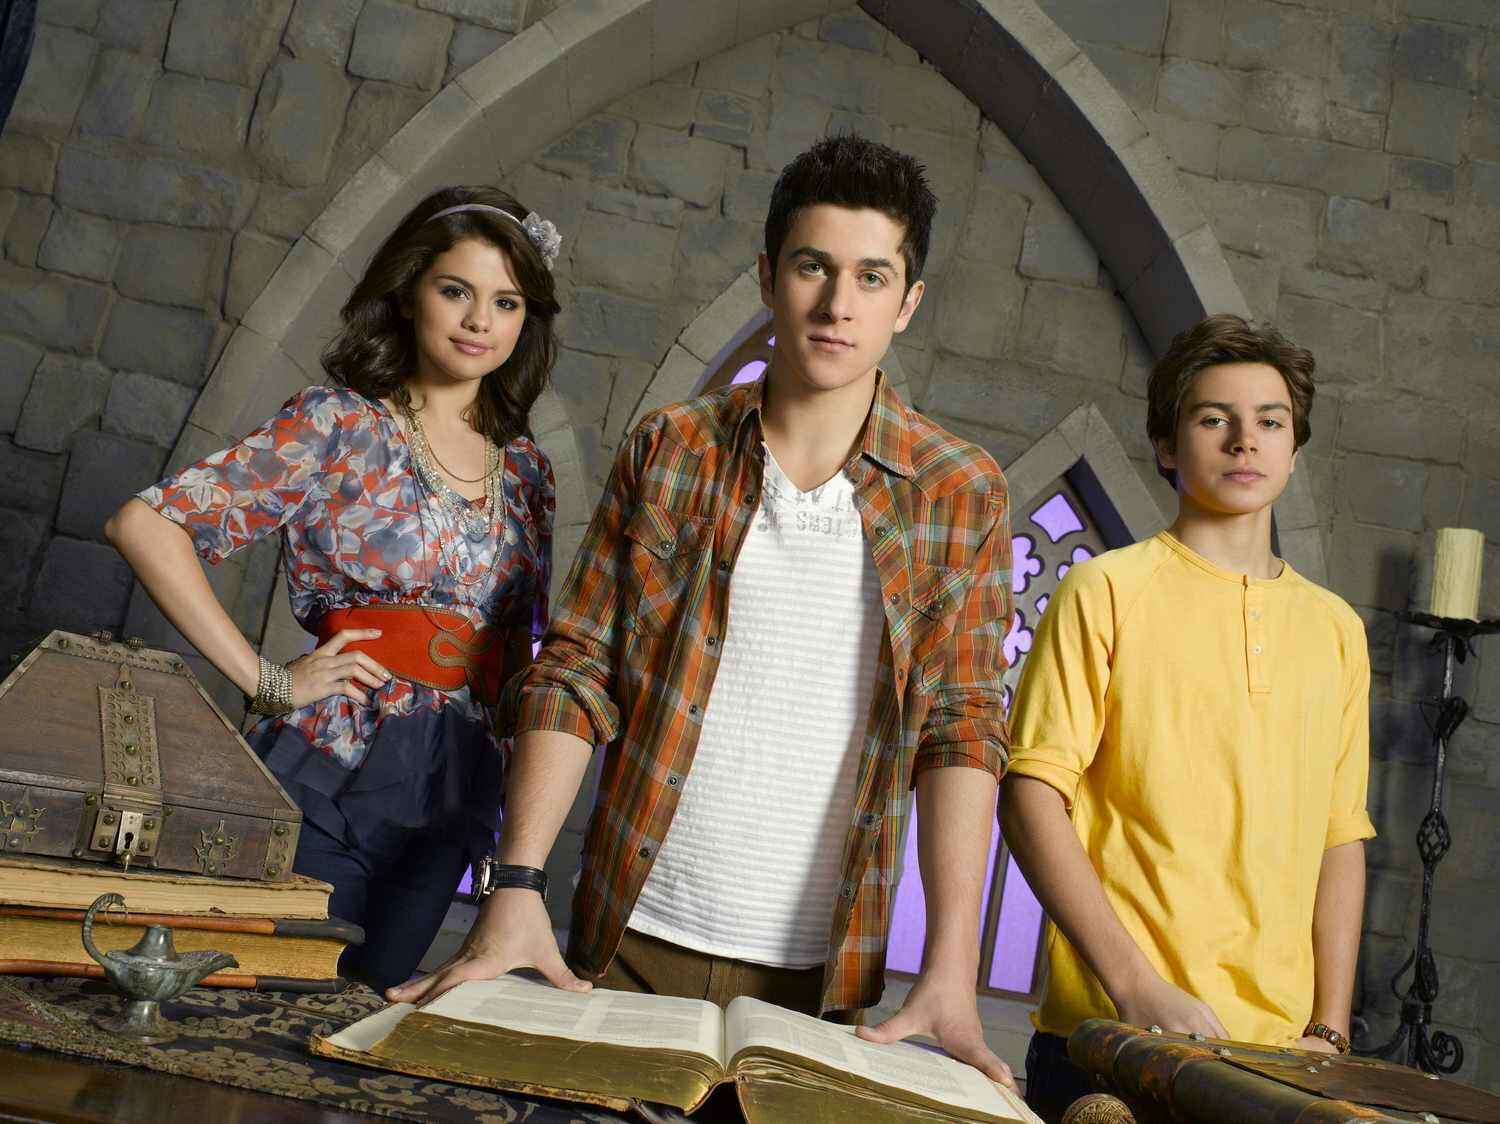 Disney Channel's "Wizards of Waverly Place" 